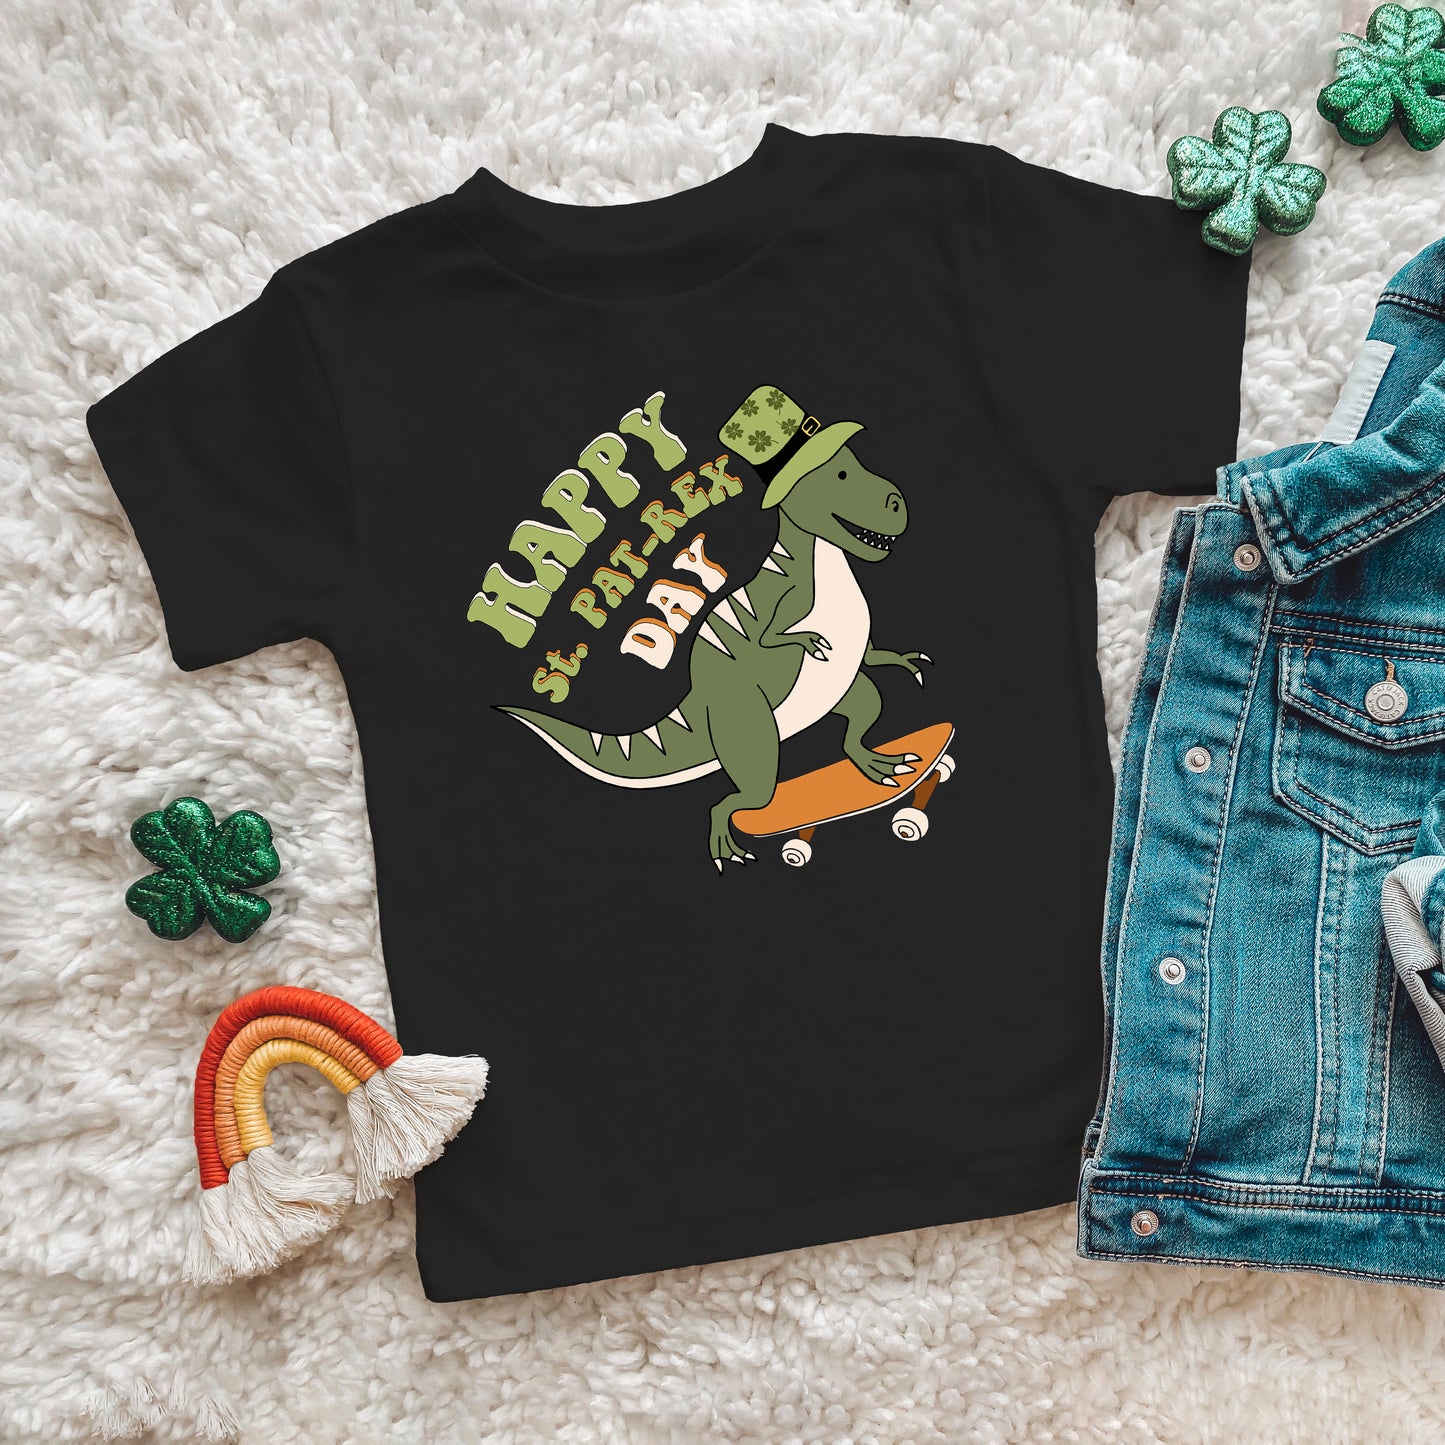 Happy St. Pat-Rex Day | Youth Short Sleeve Crew Neck